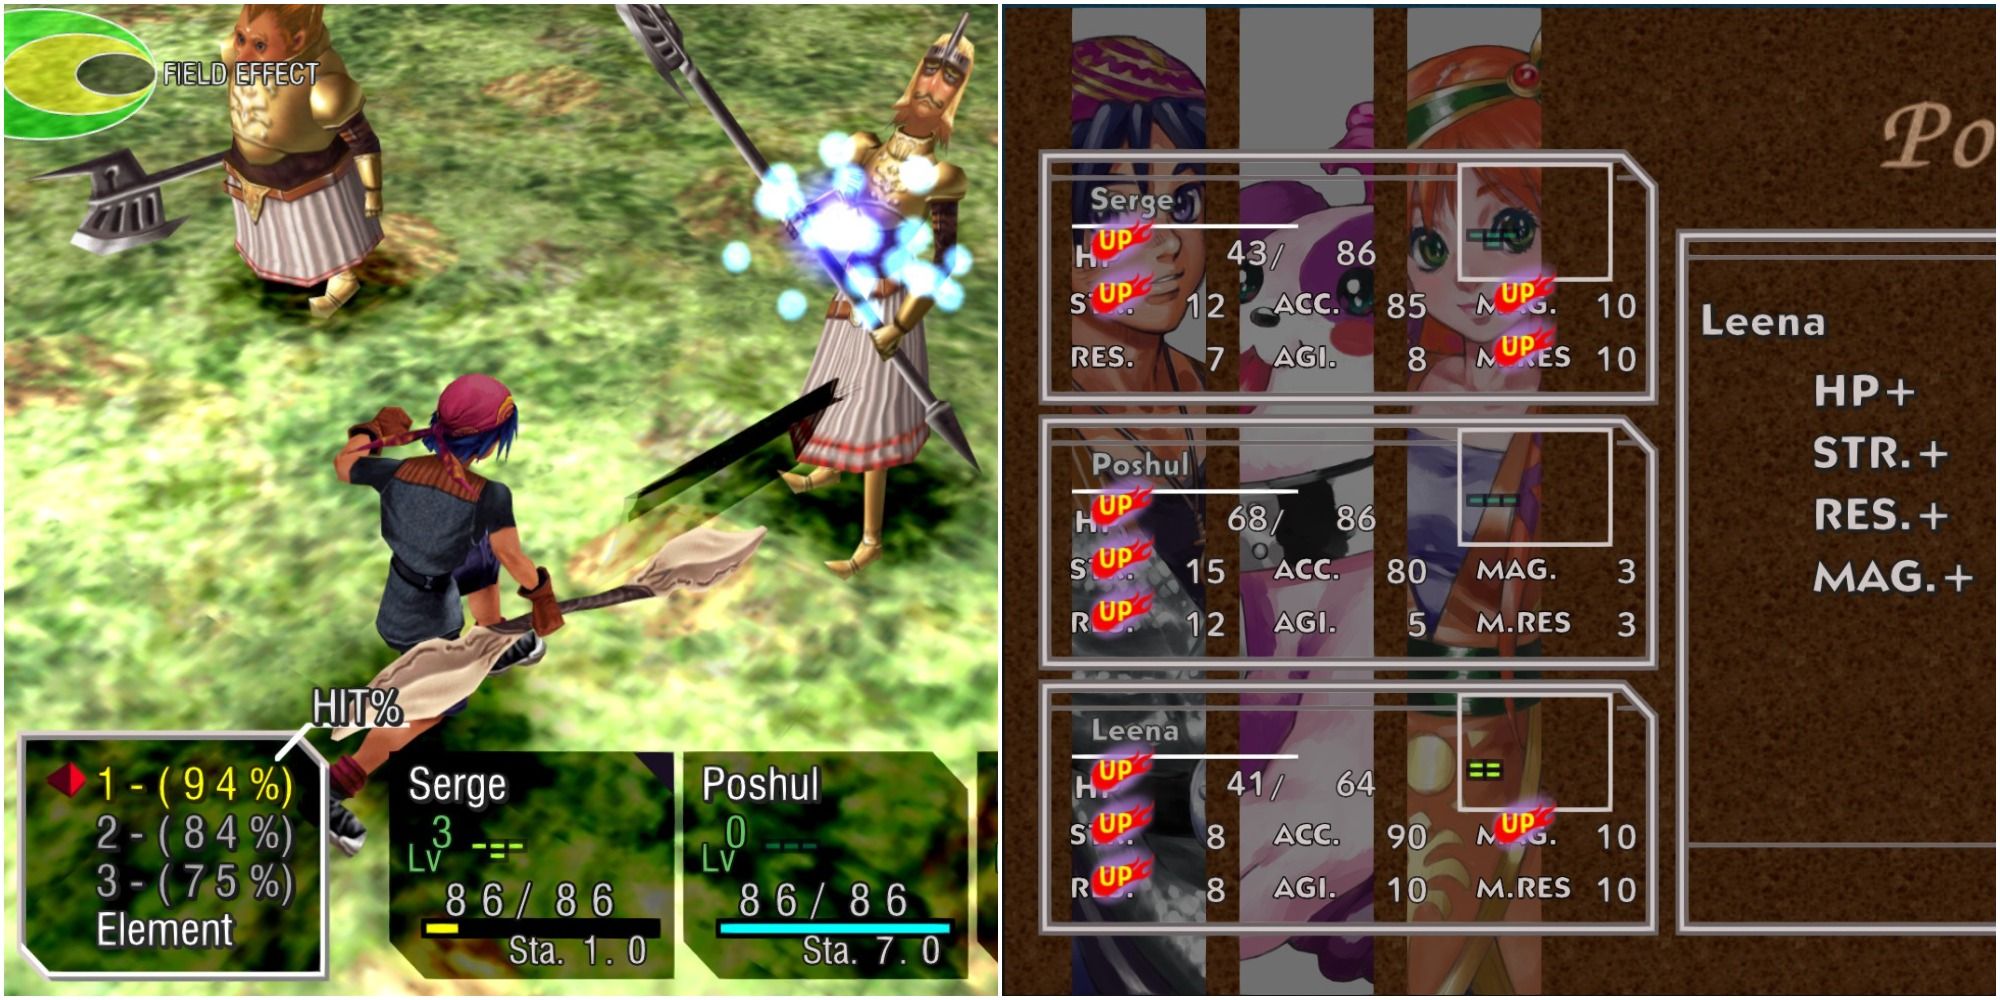 Chrono Cross on X: Want to get even closer to the action? Chrono